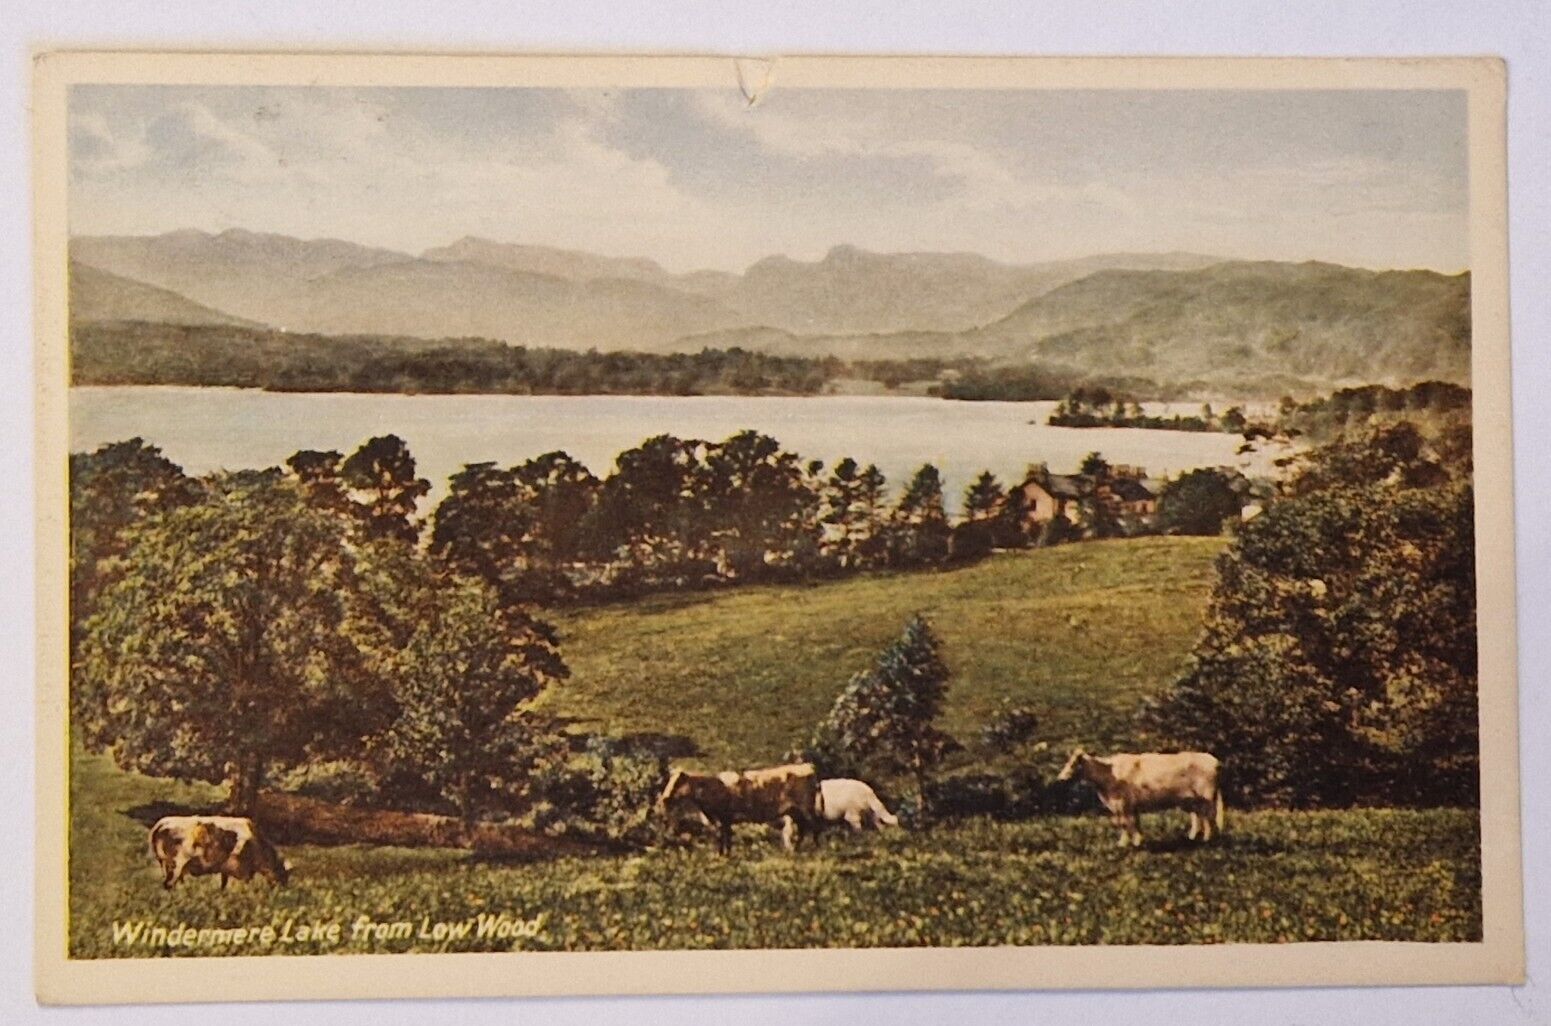 House Clearance - VINTAGE POSTCARD - WINDERMERE FROM LOW WOOD - LAKE DISTRICT